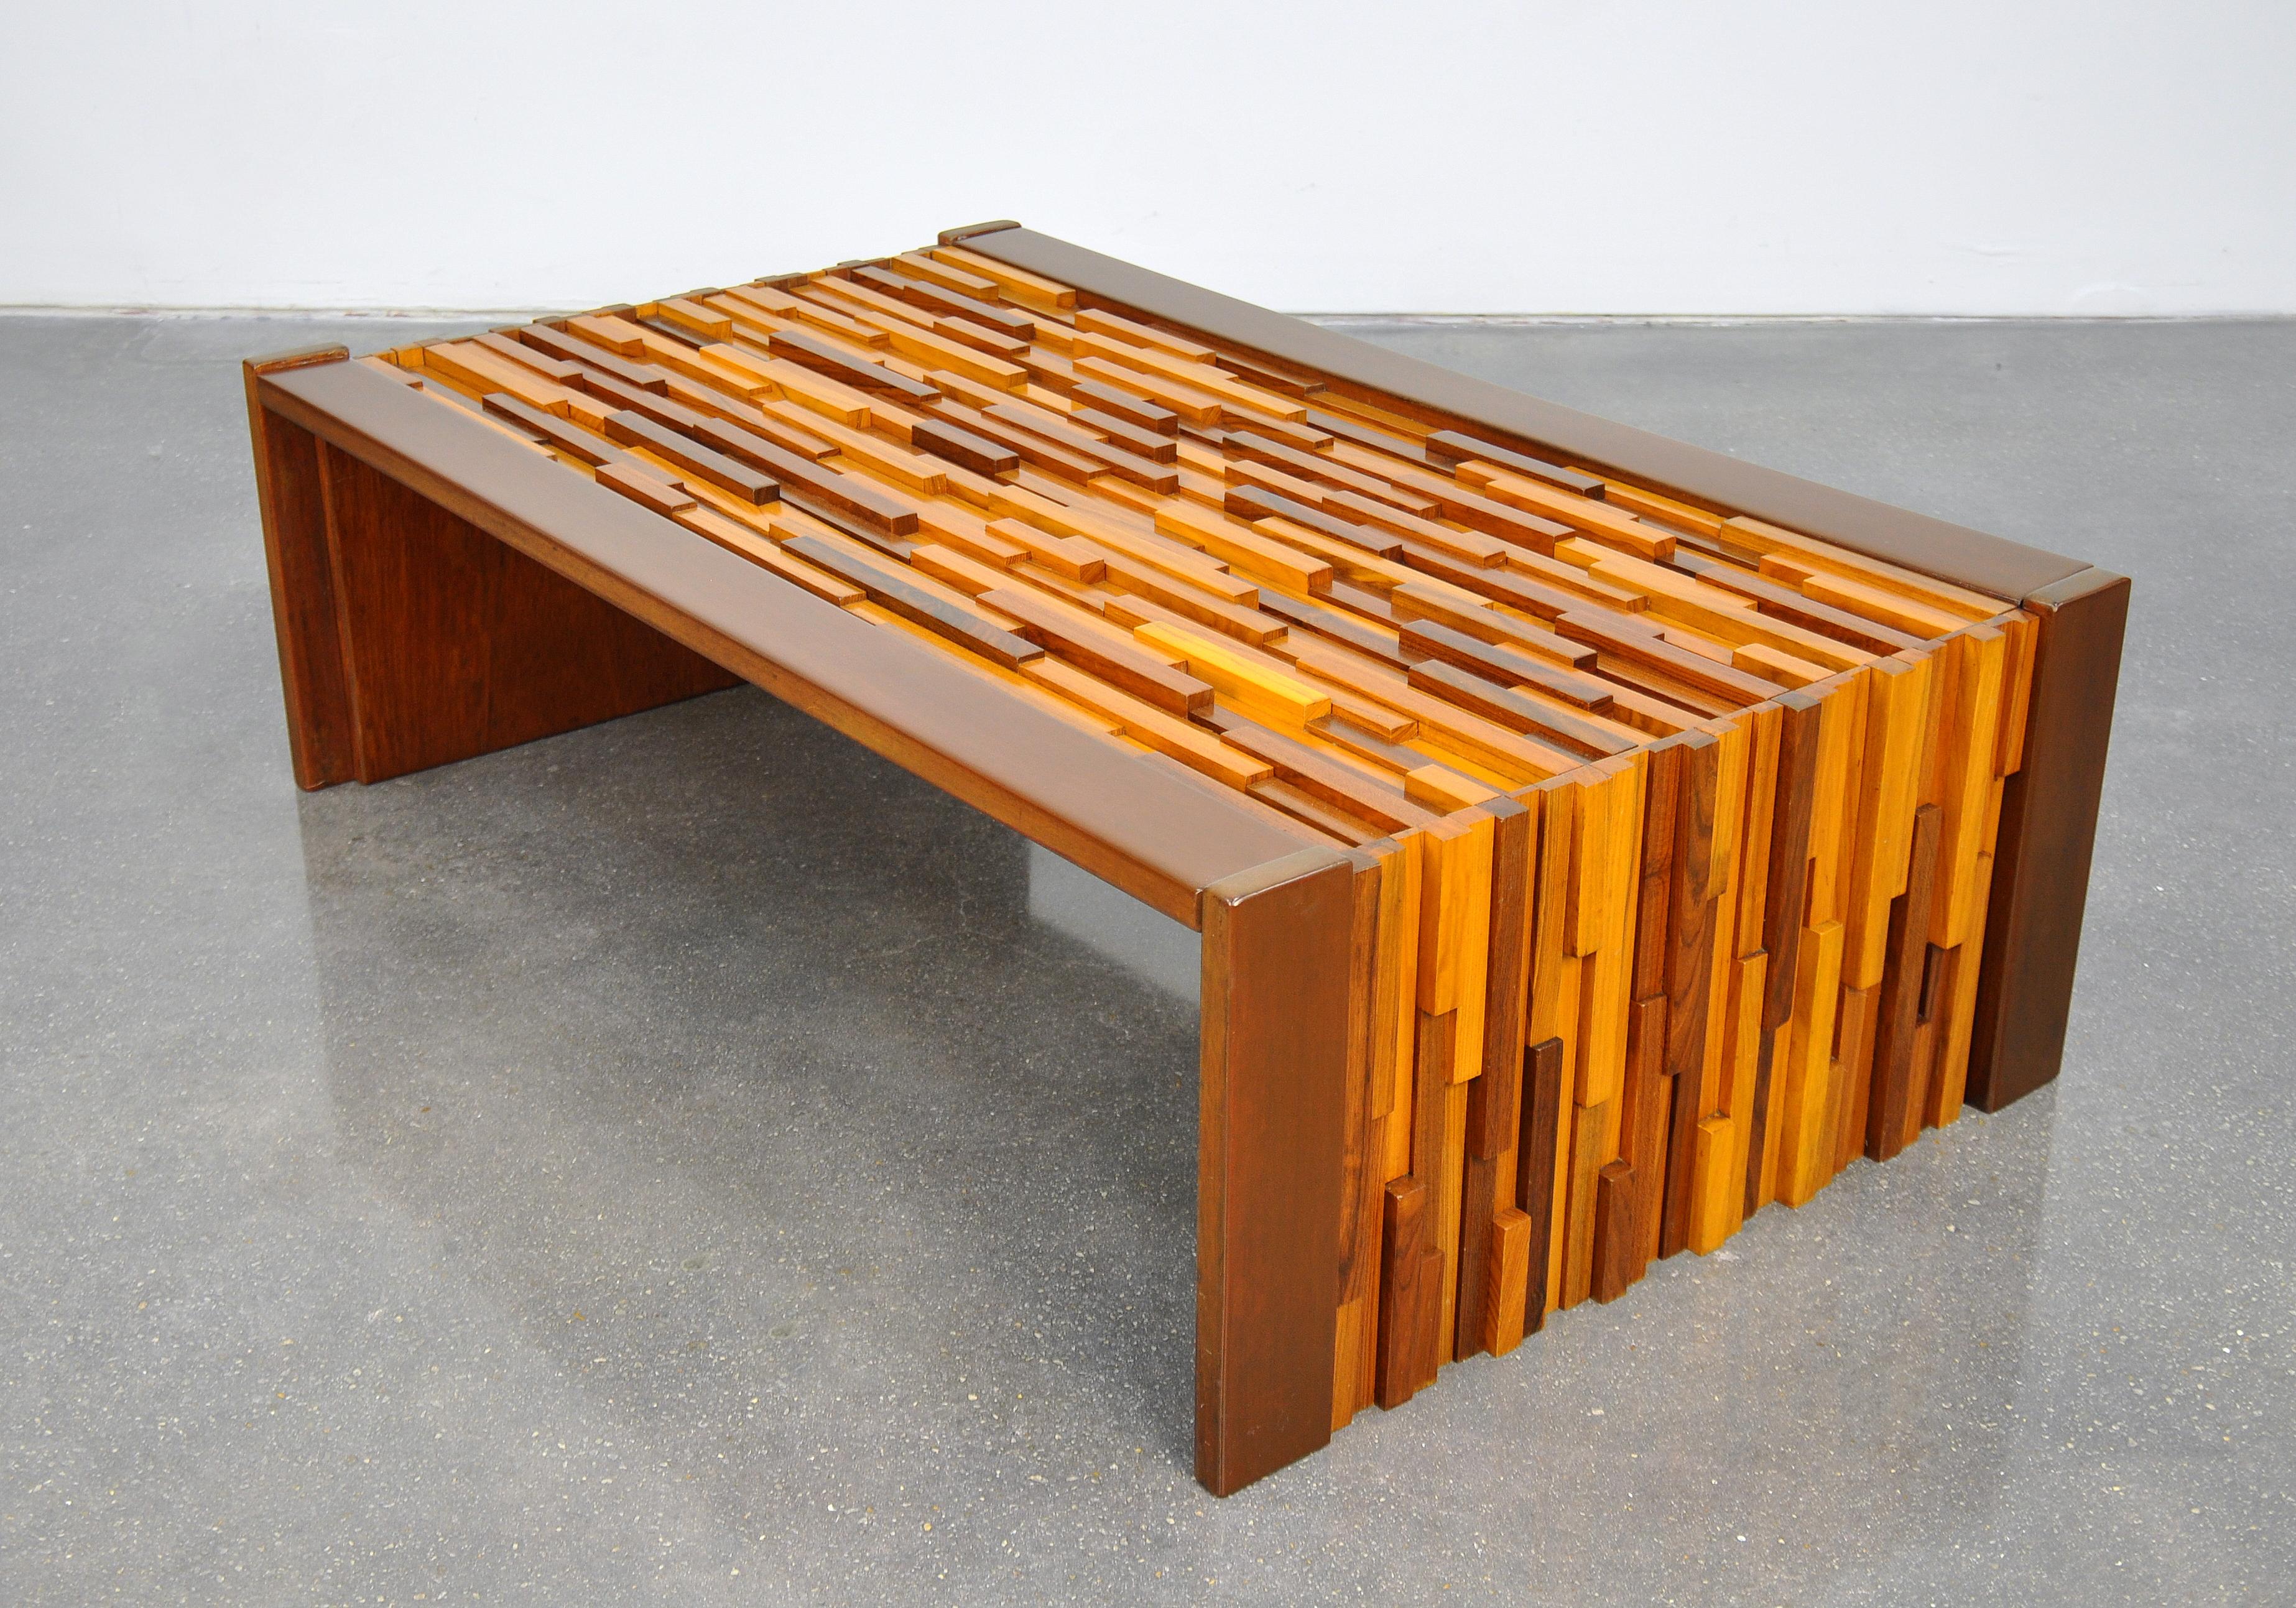 Brazilian Percival Lafer Rosewood, Teak and Mahogany Brutalist Coffee Table